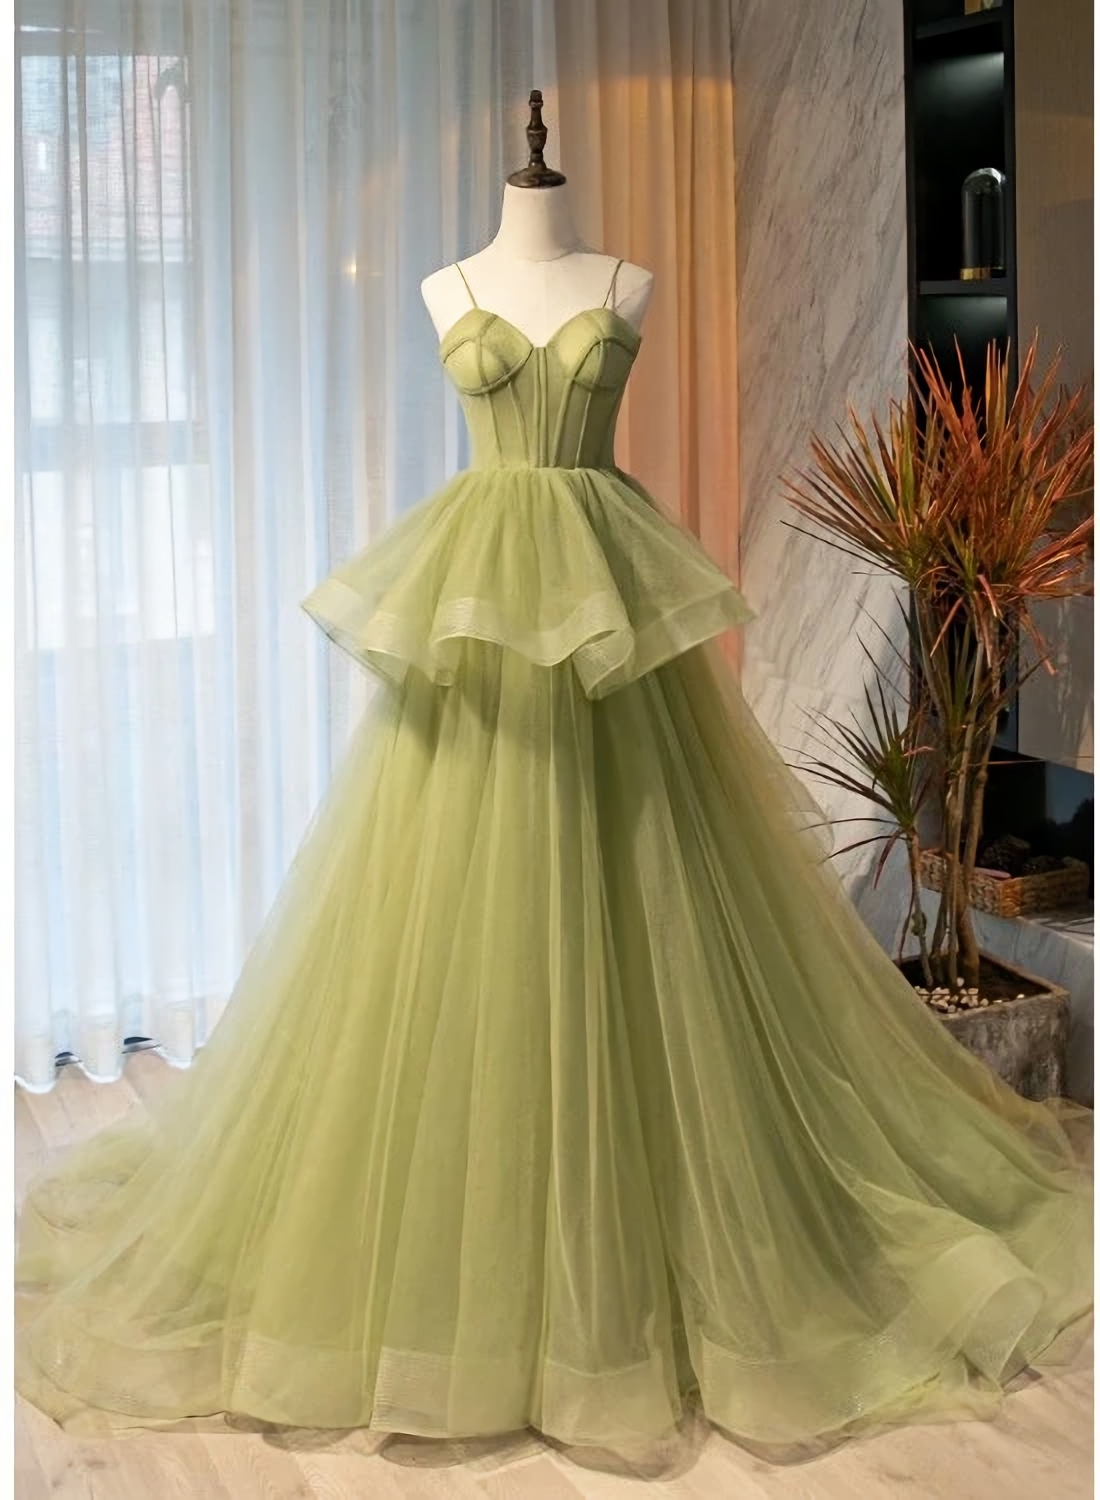 Prom Dresses Ball Gown, Beautiful Light Green Sweetheart Layers Princess Formal Gown Green Tulle Long Party Dress, Prom Dress